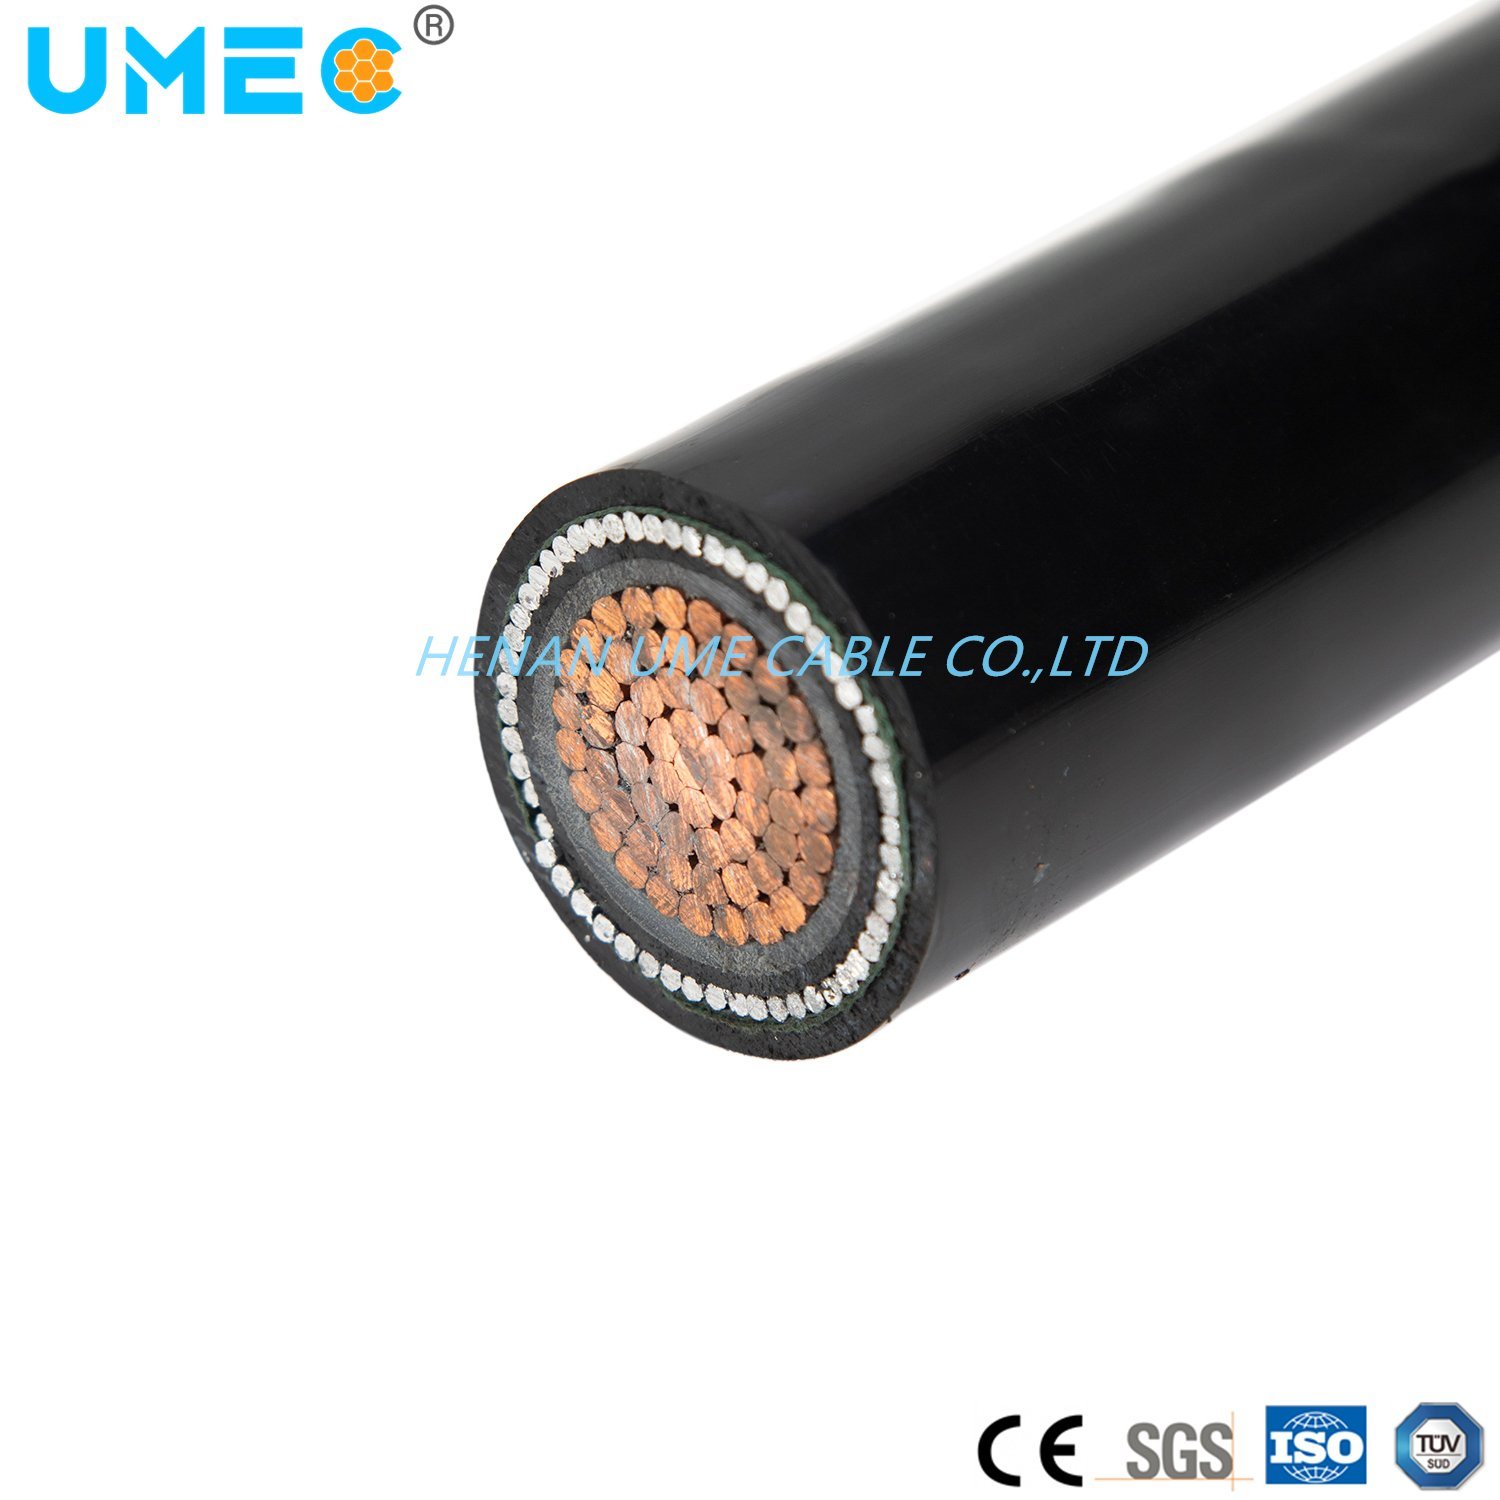 Transmission Line Al/Cu Conductor PVC Insulated PVC Sheathed Swa Cable